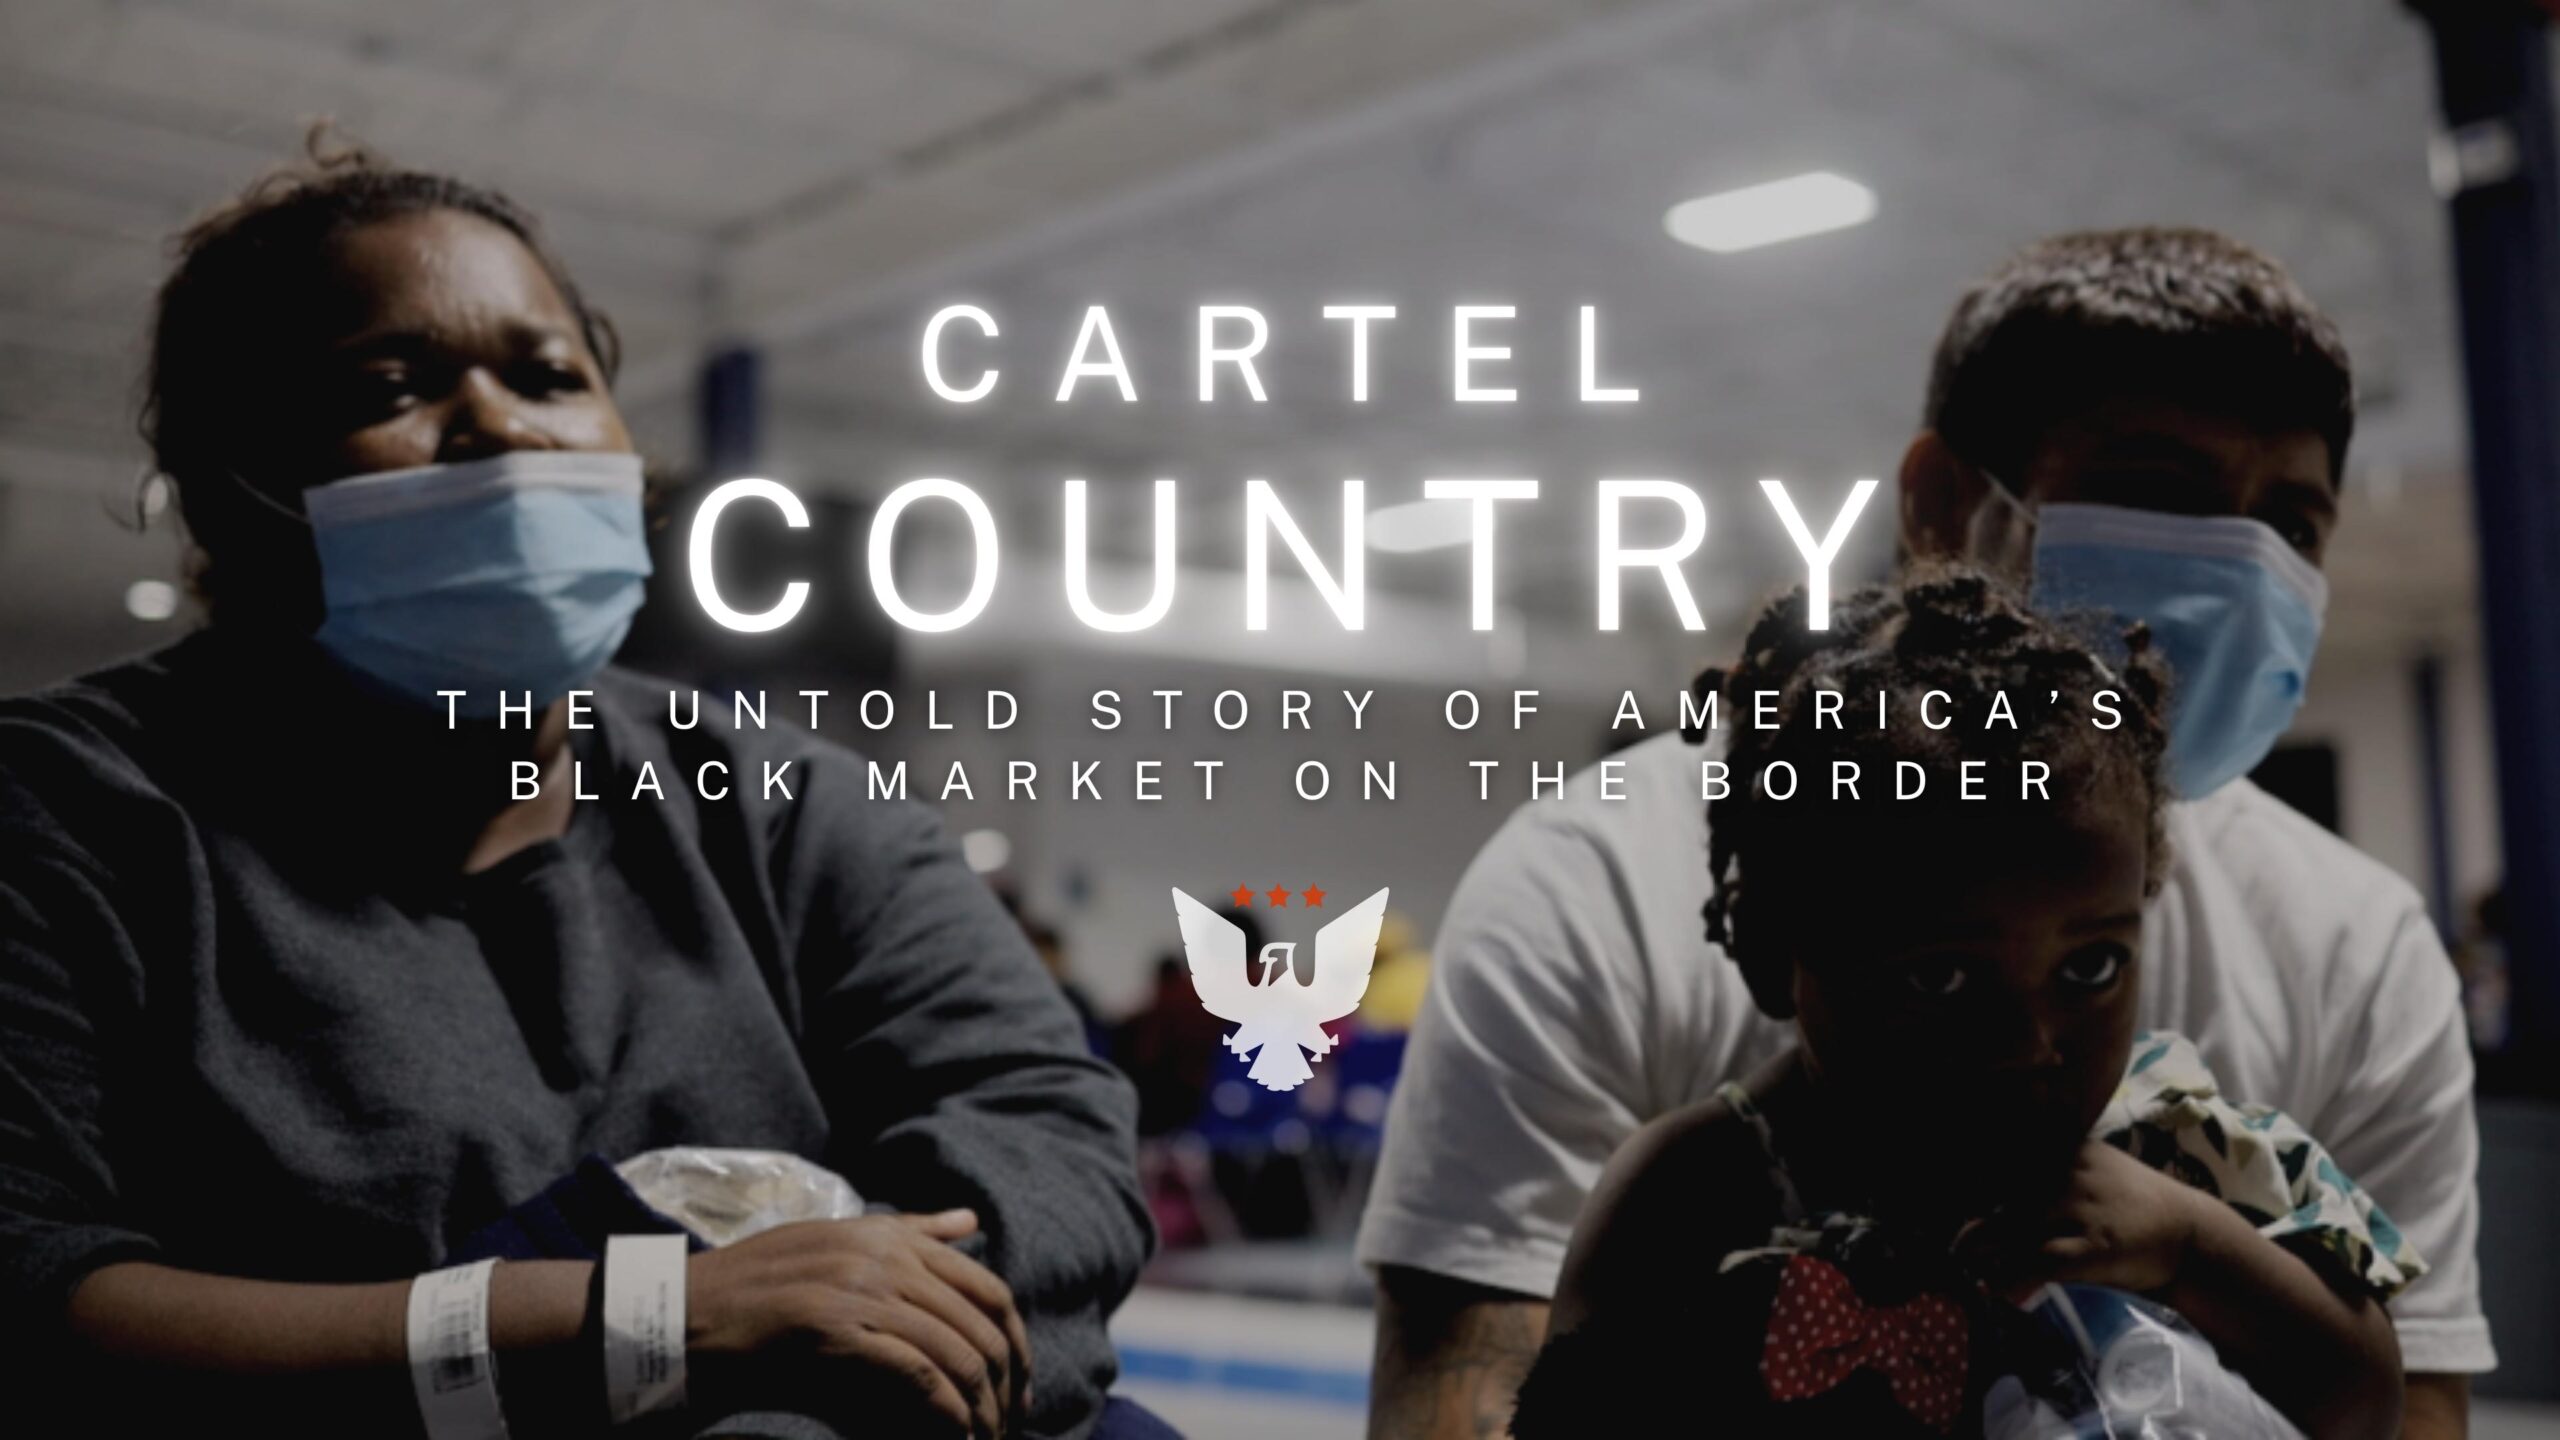 Shocking New Federalist Documentary ‘Cartel Country’ Premieres Tuesday At 9:00 P.M. ET